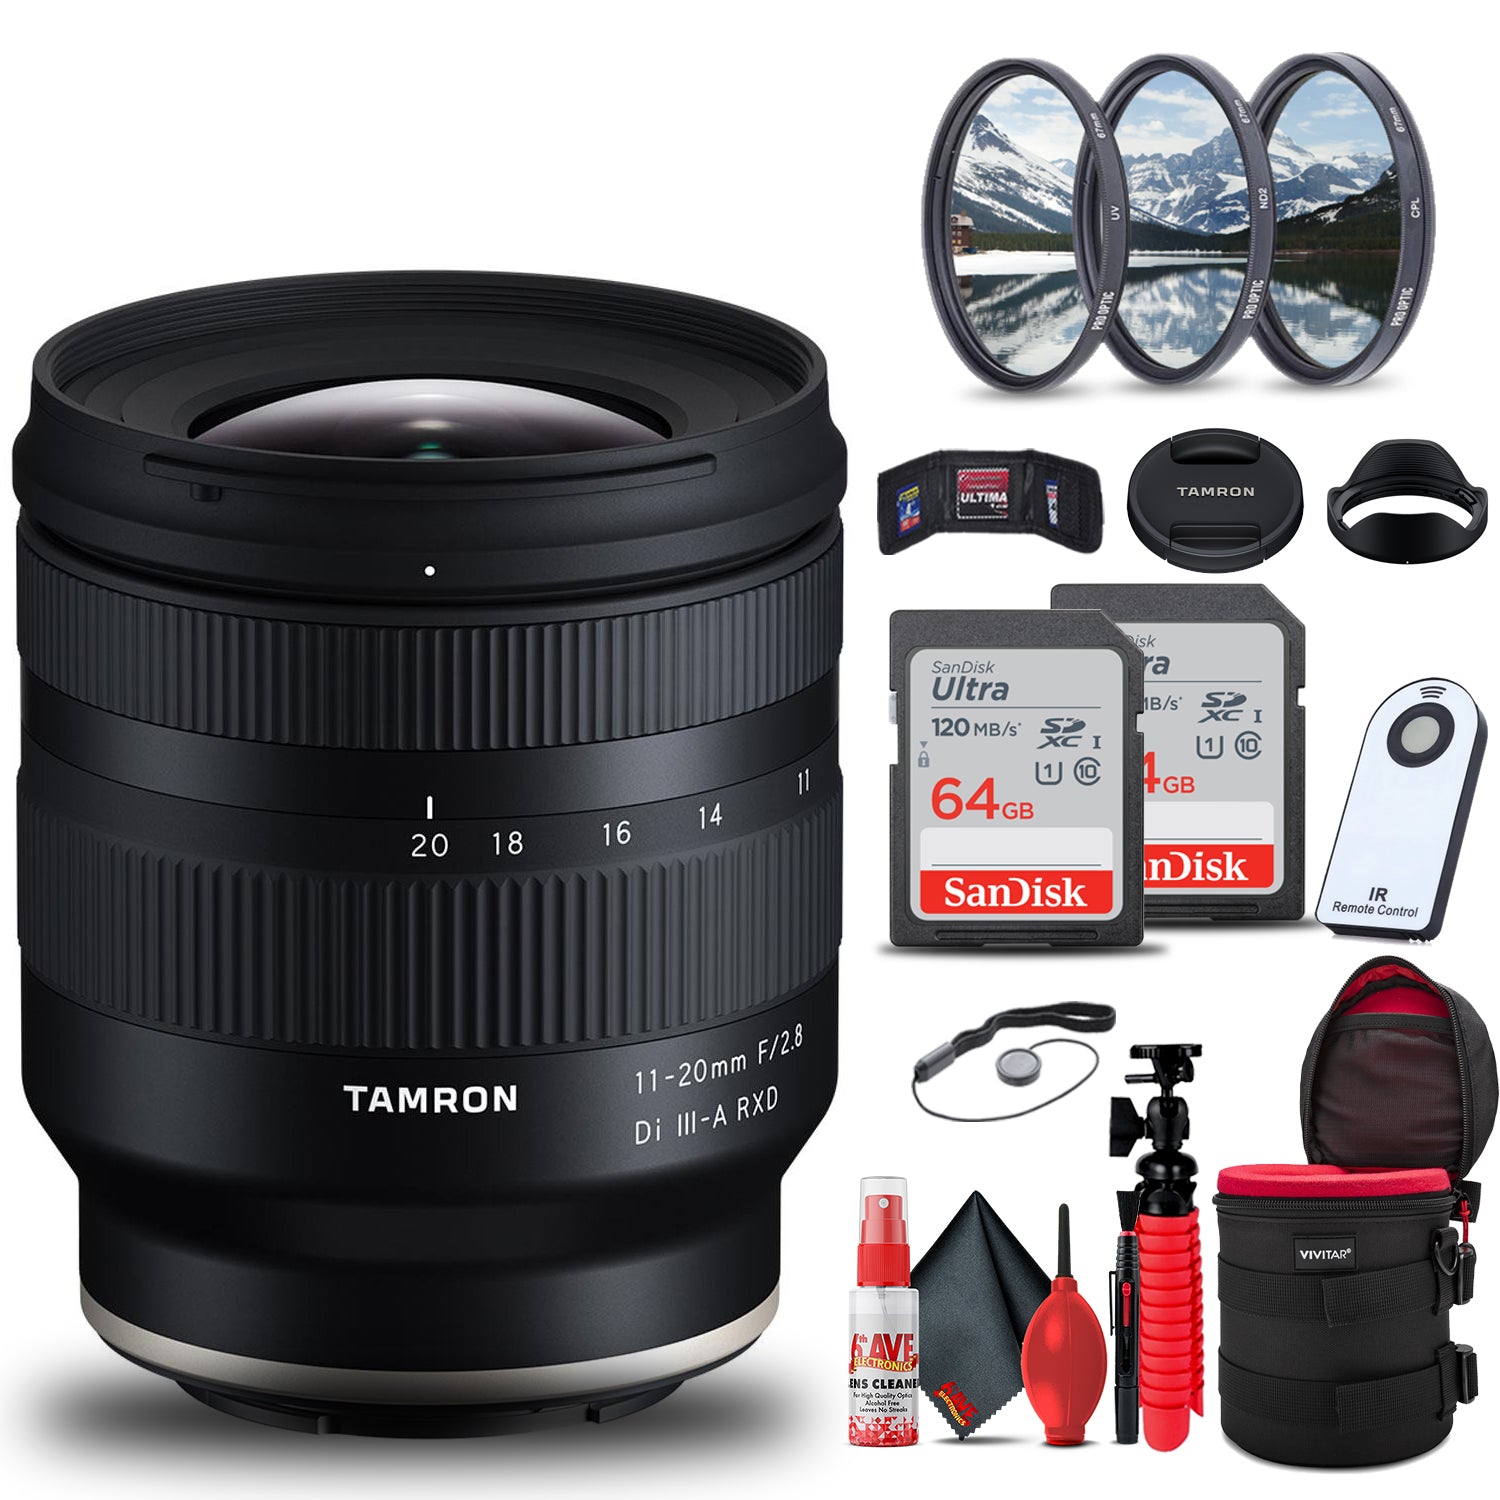 Tamron 11-20mm f/2.8 Di III-A RXD Lens for Sony E + 128GB Accessory Bundle